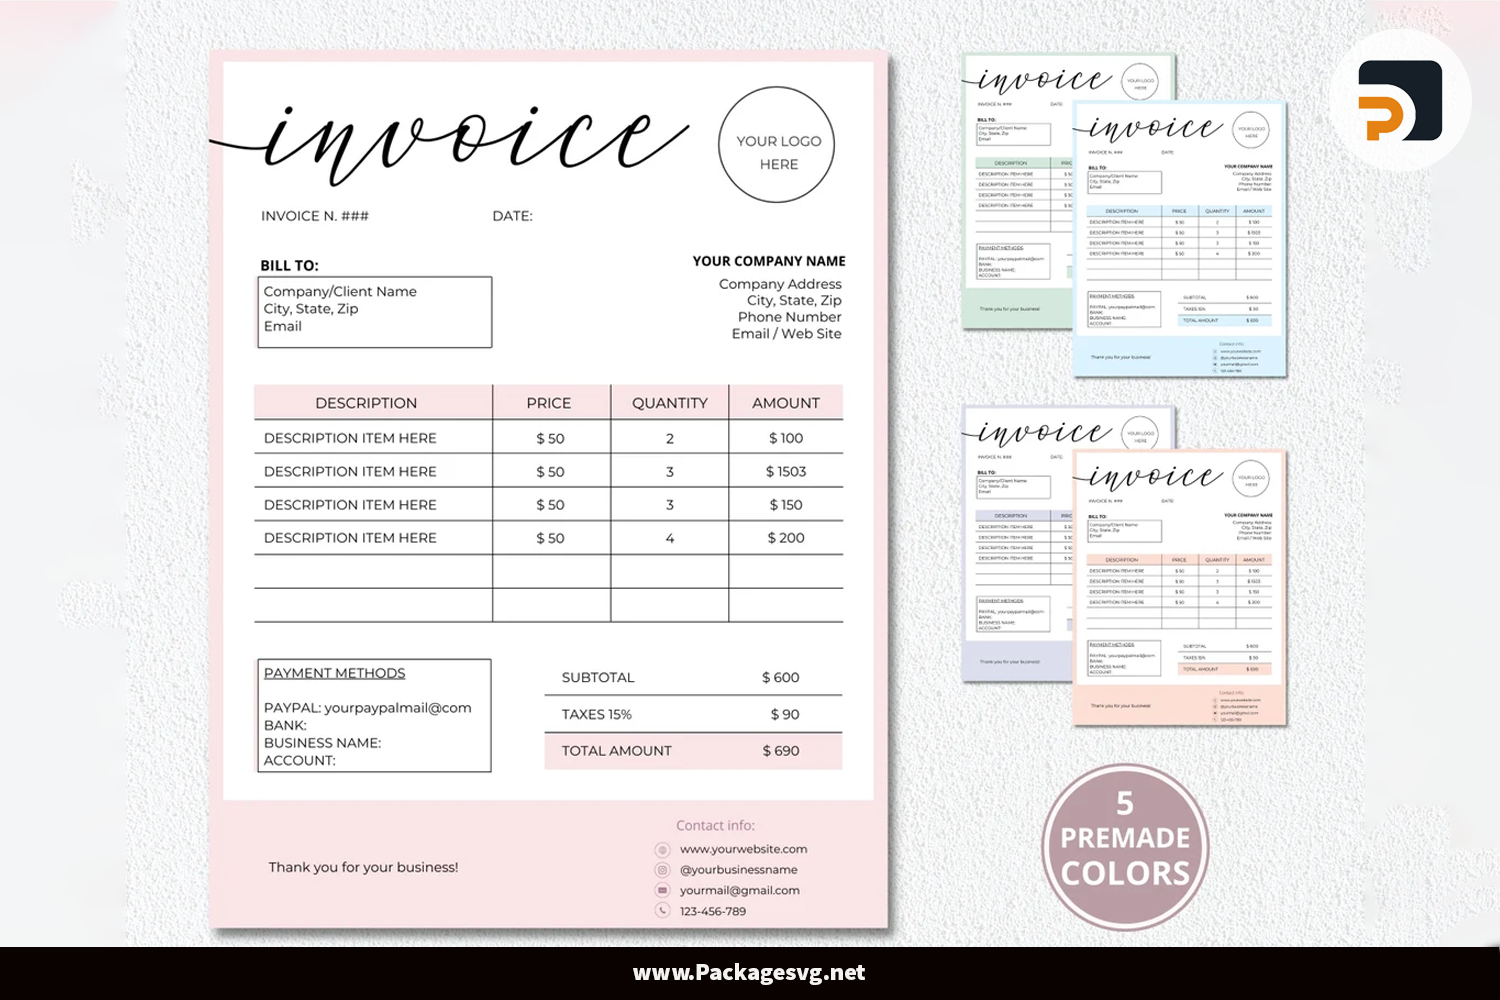 Invoice Small Business Canva Template